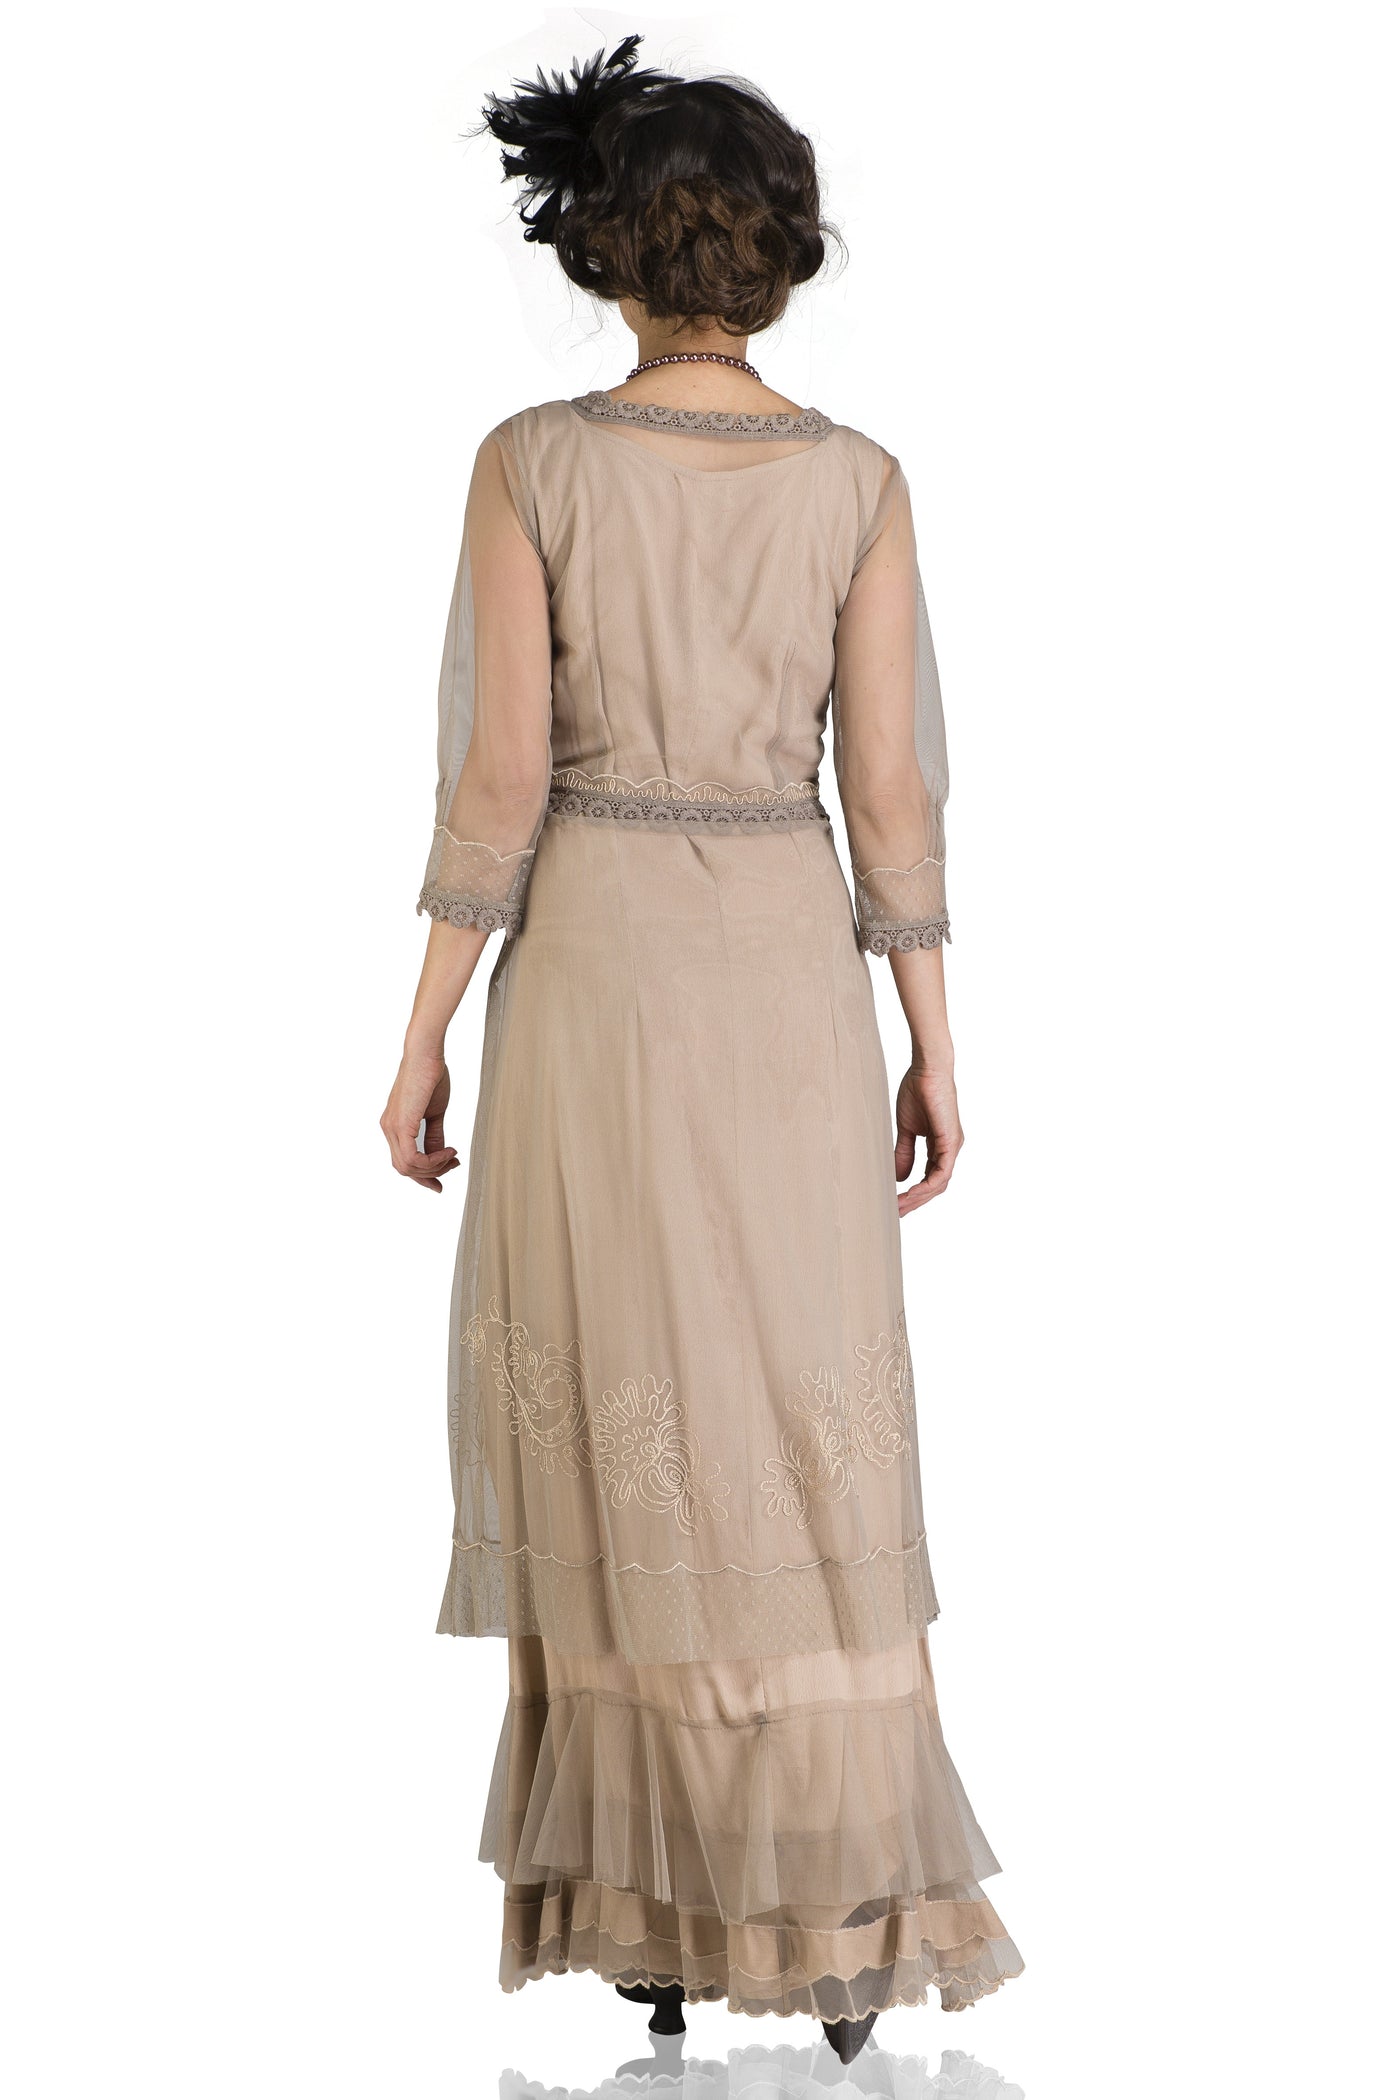 Audrey Vintage Style Party Gown CL-407 in Sand by Nataya